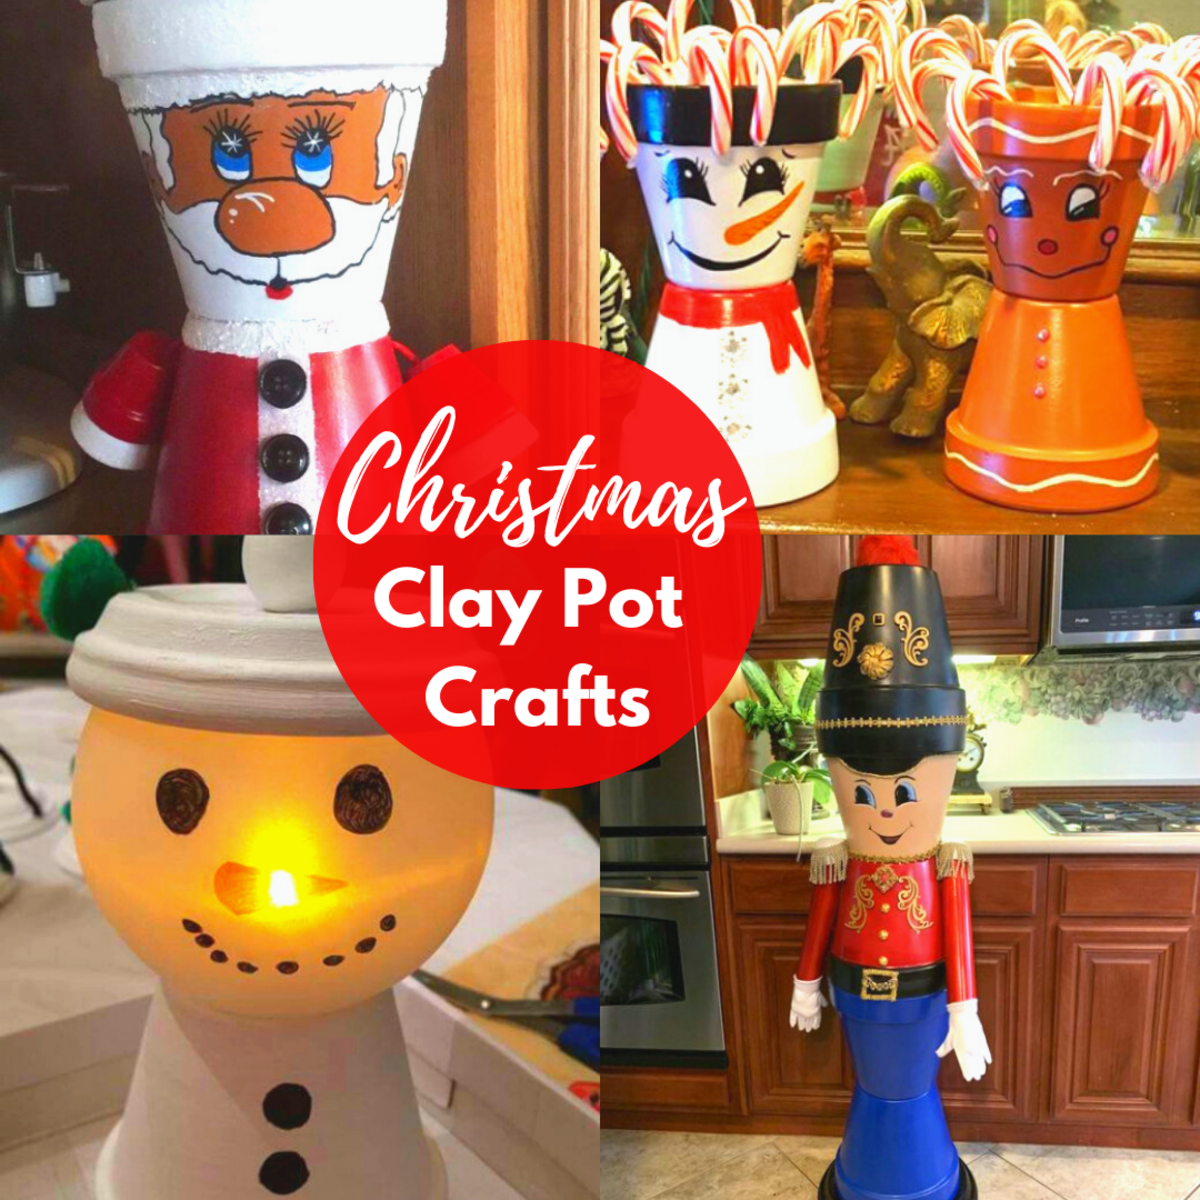 60+ DIY Christmas Clay Pot Crafts for Festive Fun and Cheer